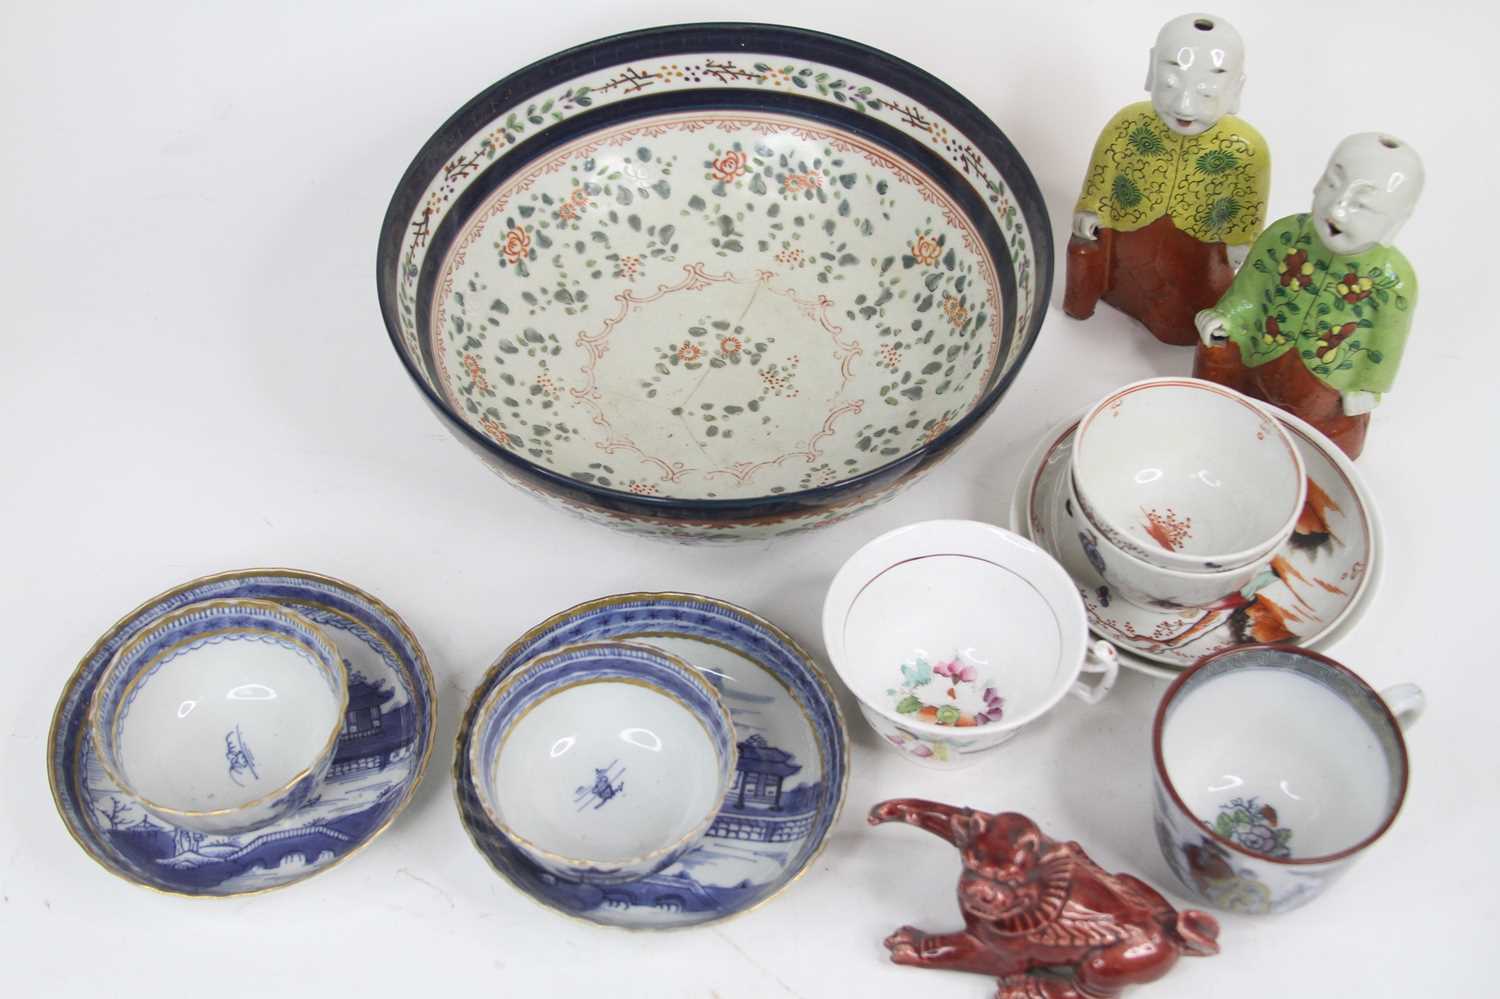 A collection of Asian ceramics, to include blue and white porcelain tea bowls Large bowl is